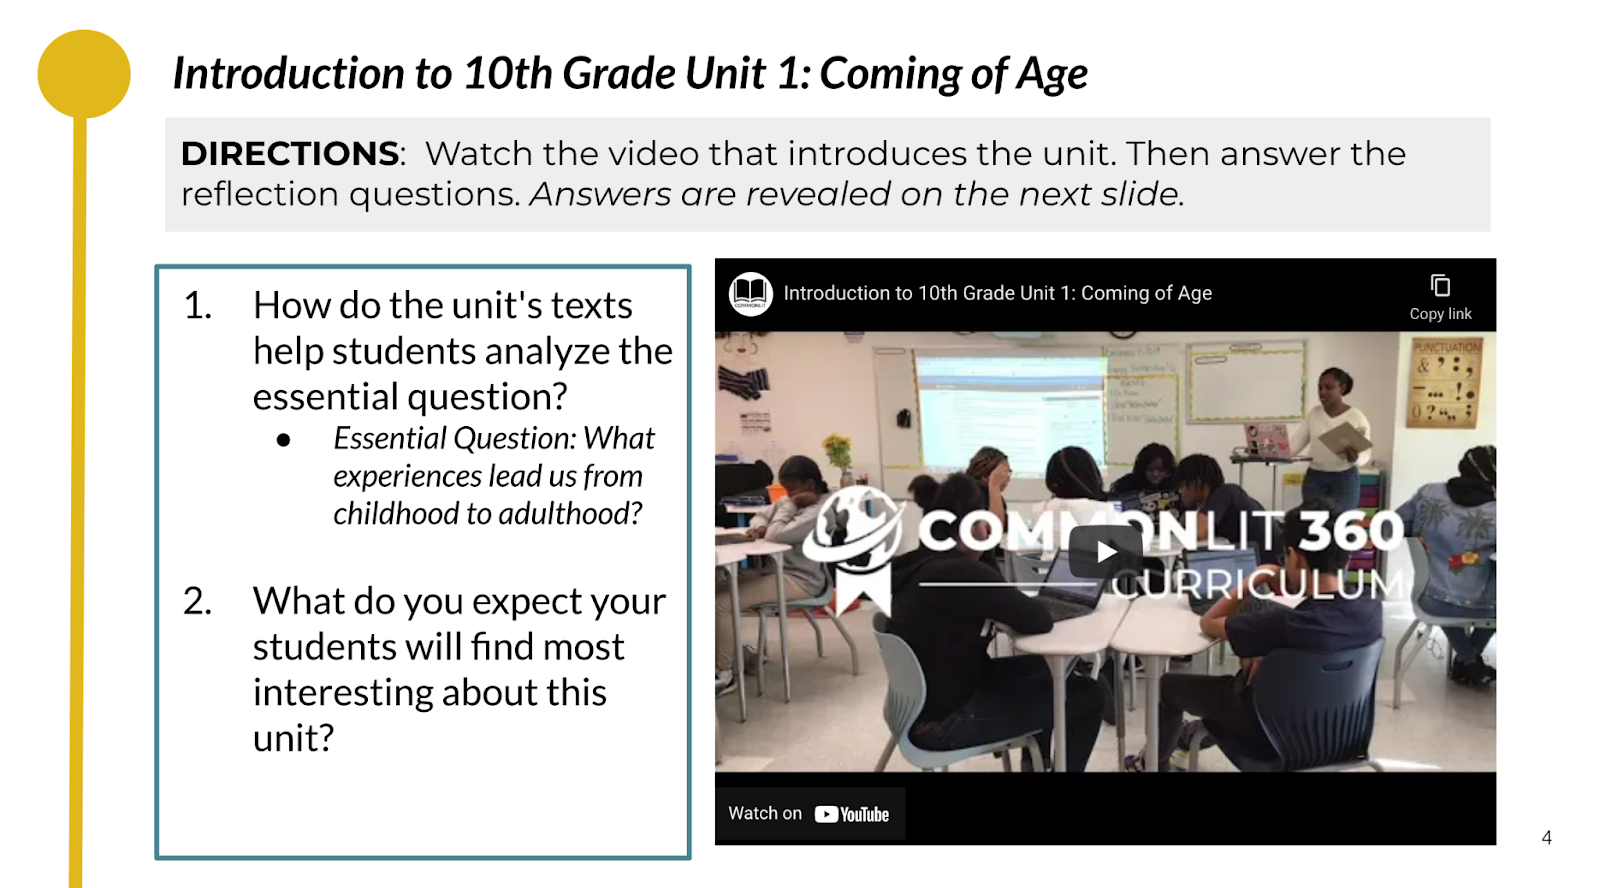 A slide from the video training for CommonLit 360 10th Grade Unit 1 about the unit's texts.